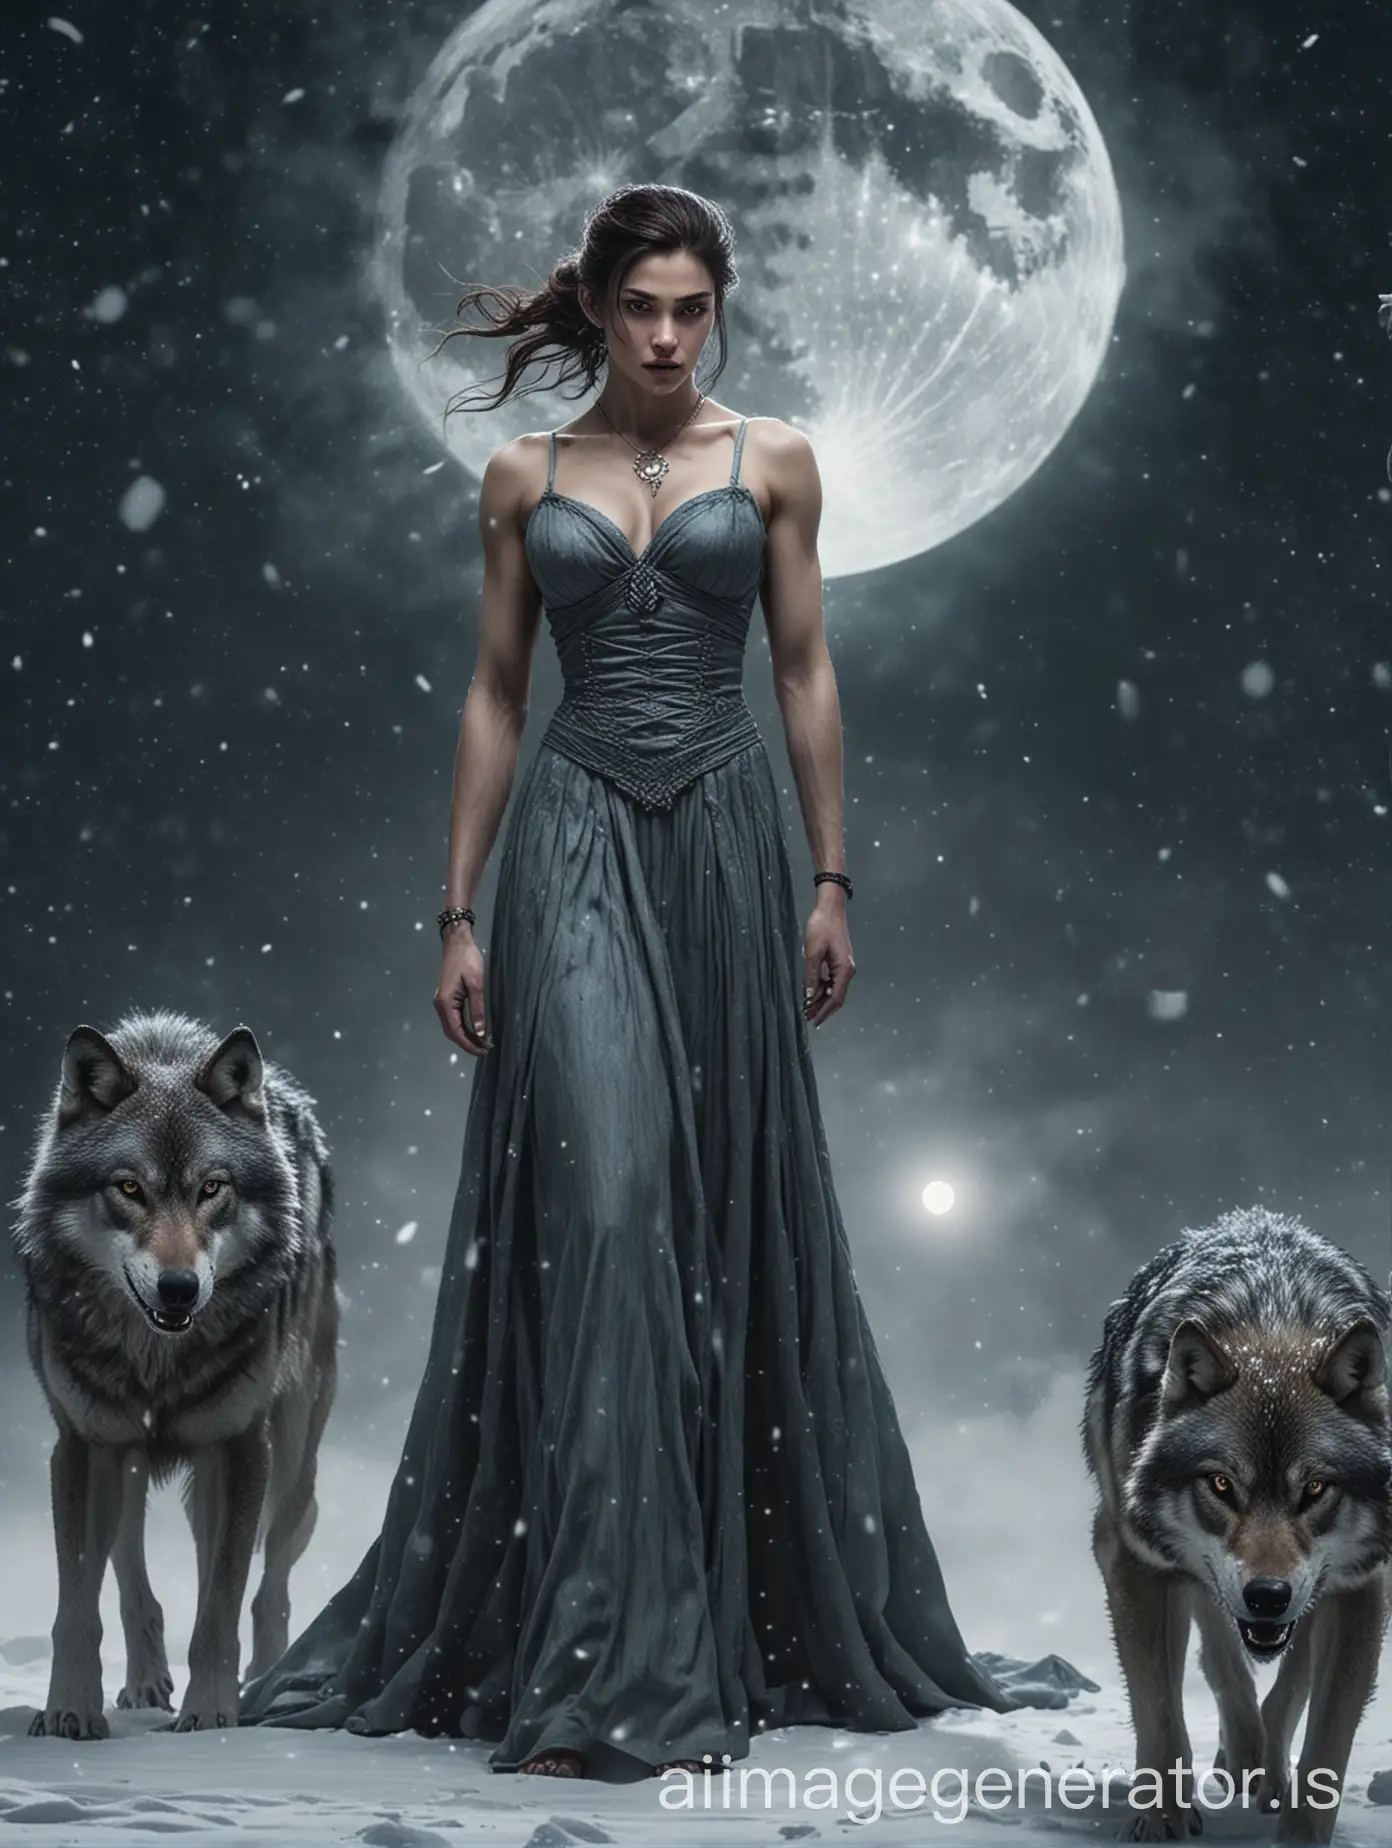 a woman in a sleeveless long dress, a muscular man, on a snowy night, with a round moon in the sky, and a fierce wolf